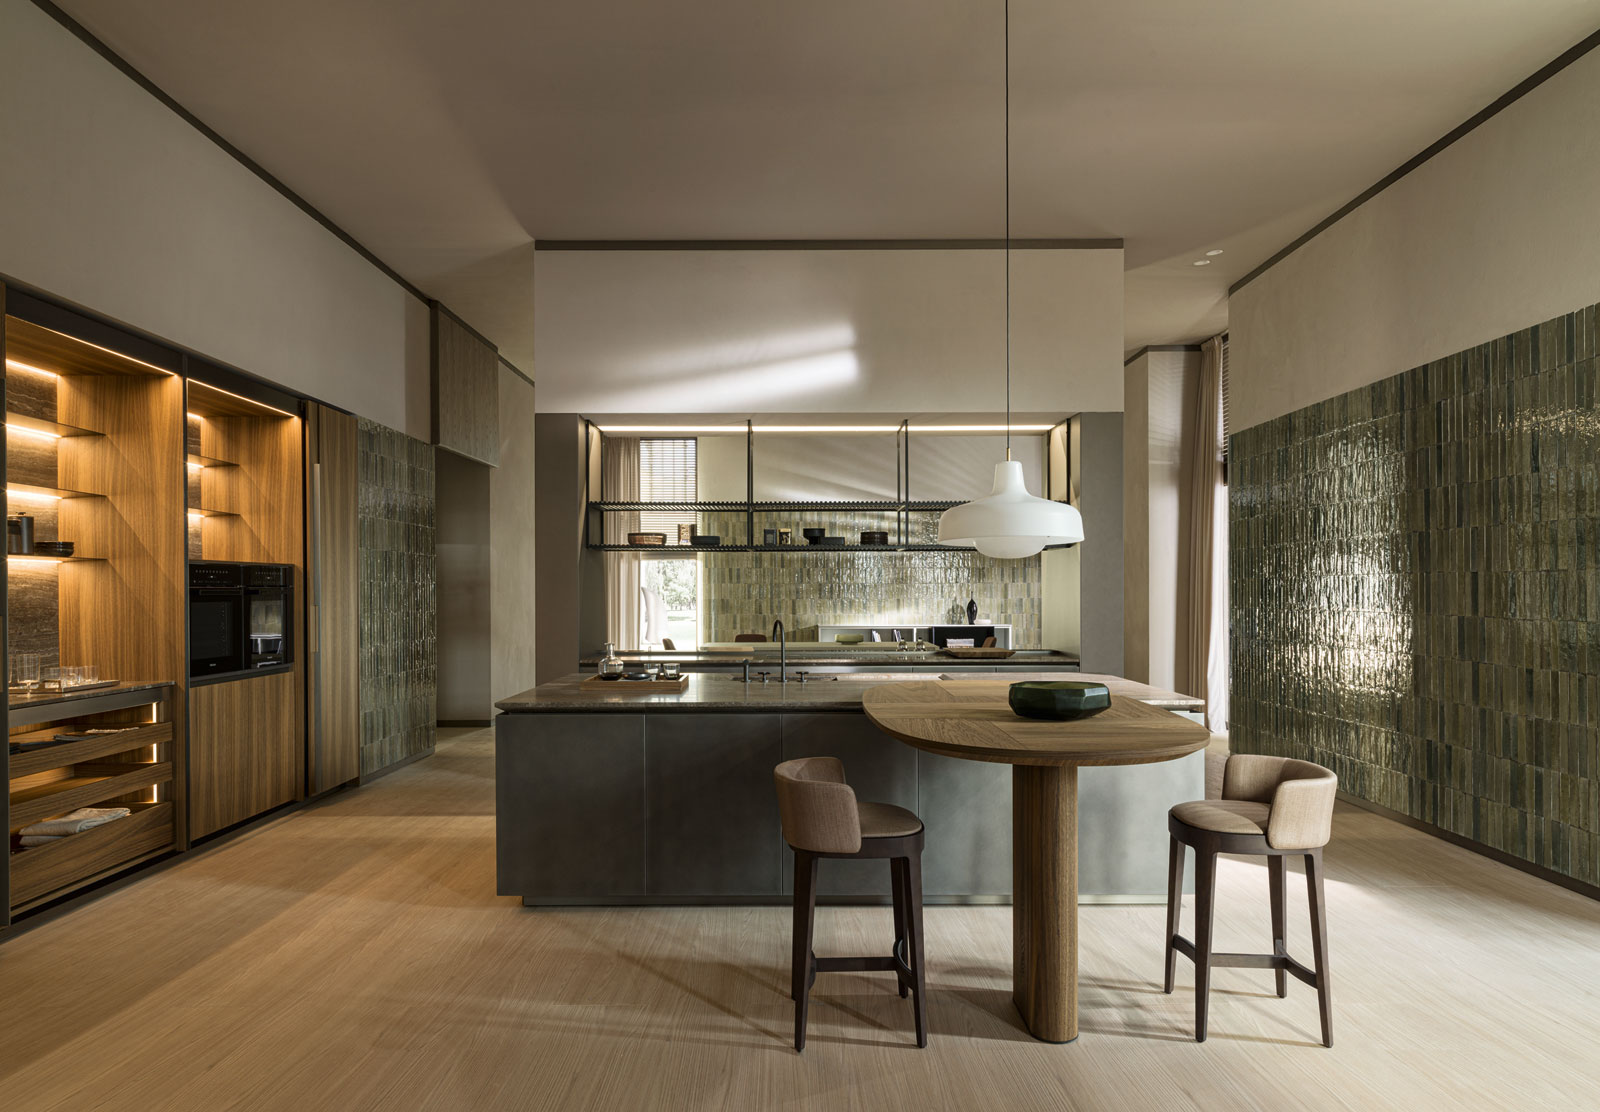 Intersection kitchen designed by Vincent Van Duysen -<br>  The setting features Marazzi ceramic tiles